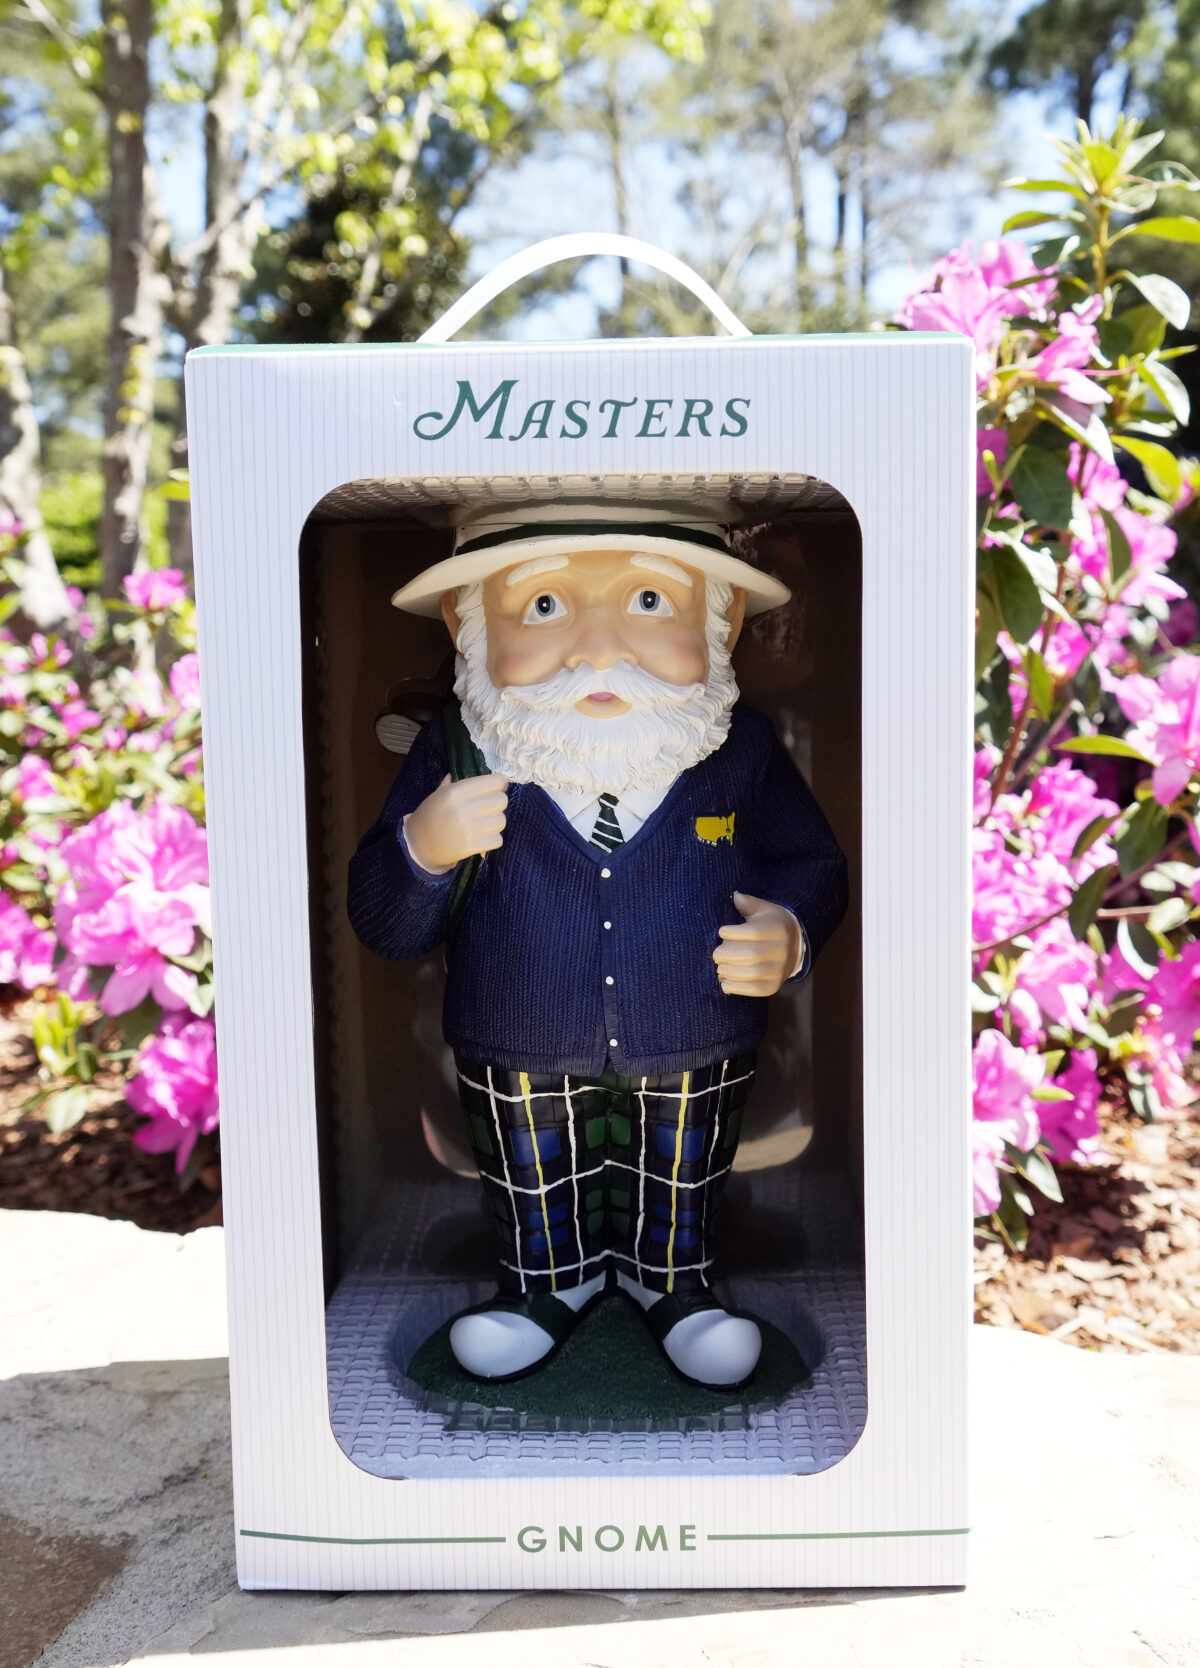 Masters garden gnome is a hot item once again, with line stretching to practice area